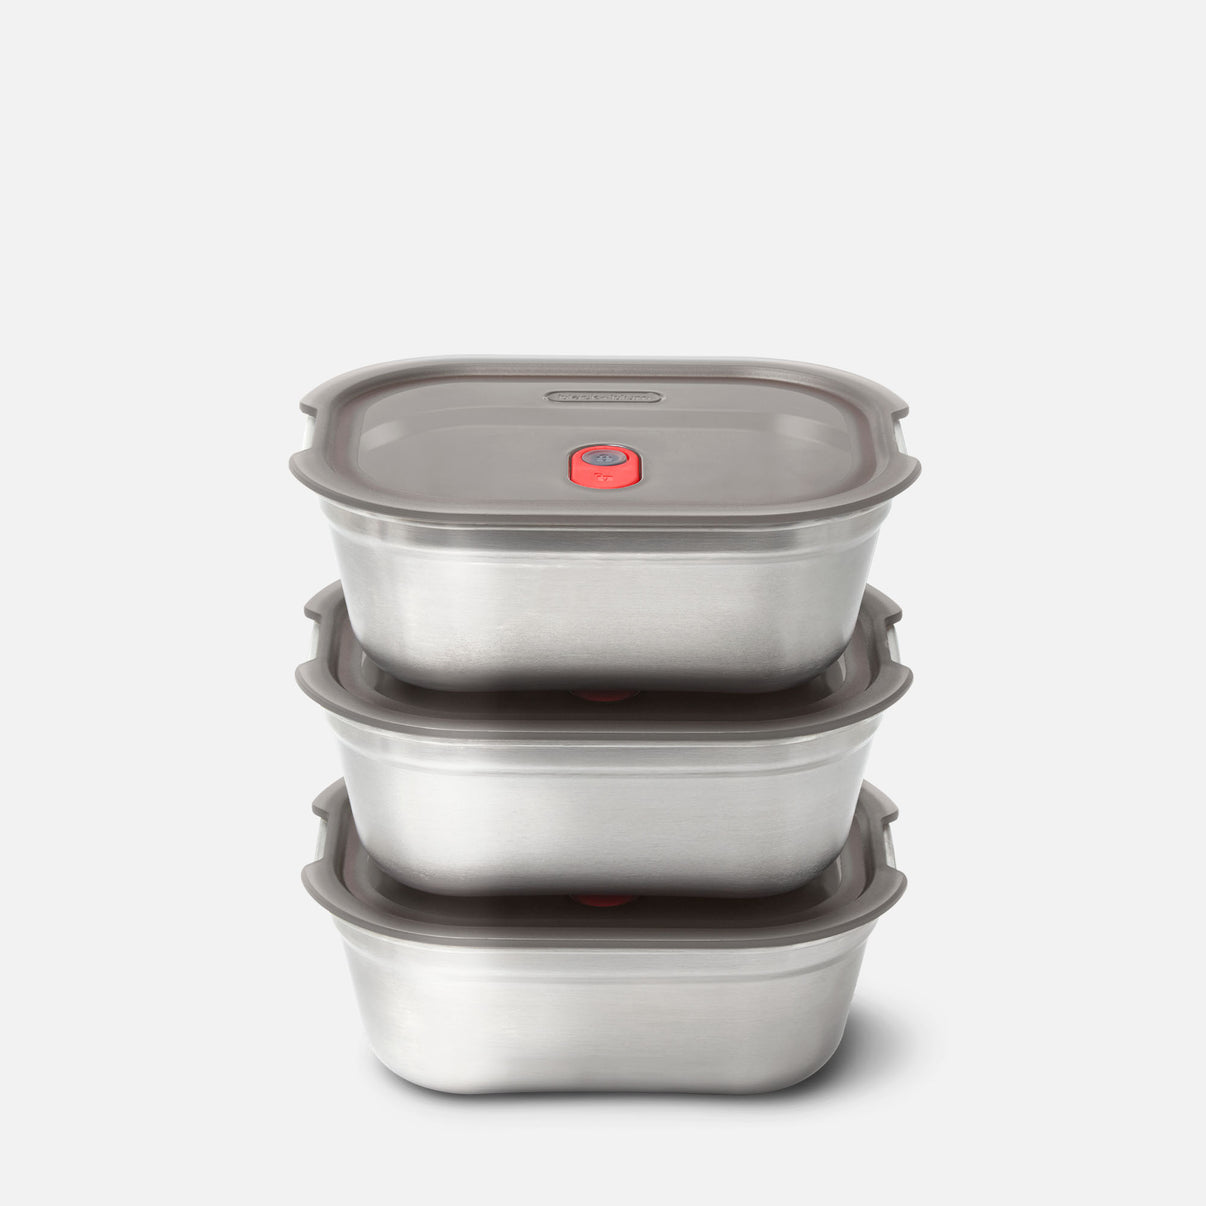 Pack of 30 Meal Prep Food Storage Containers with Clear Plastic Lid, Black